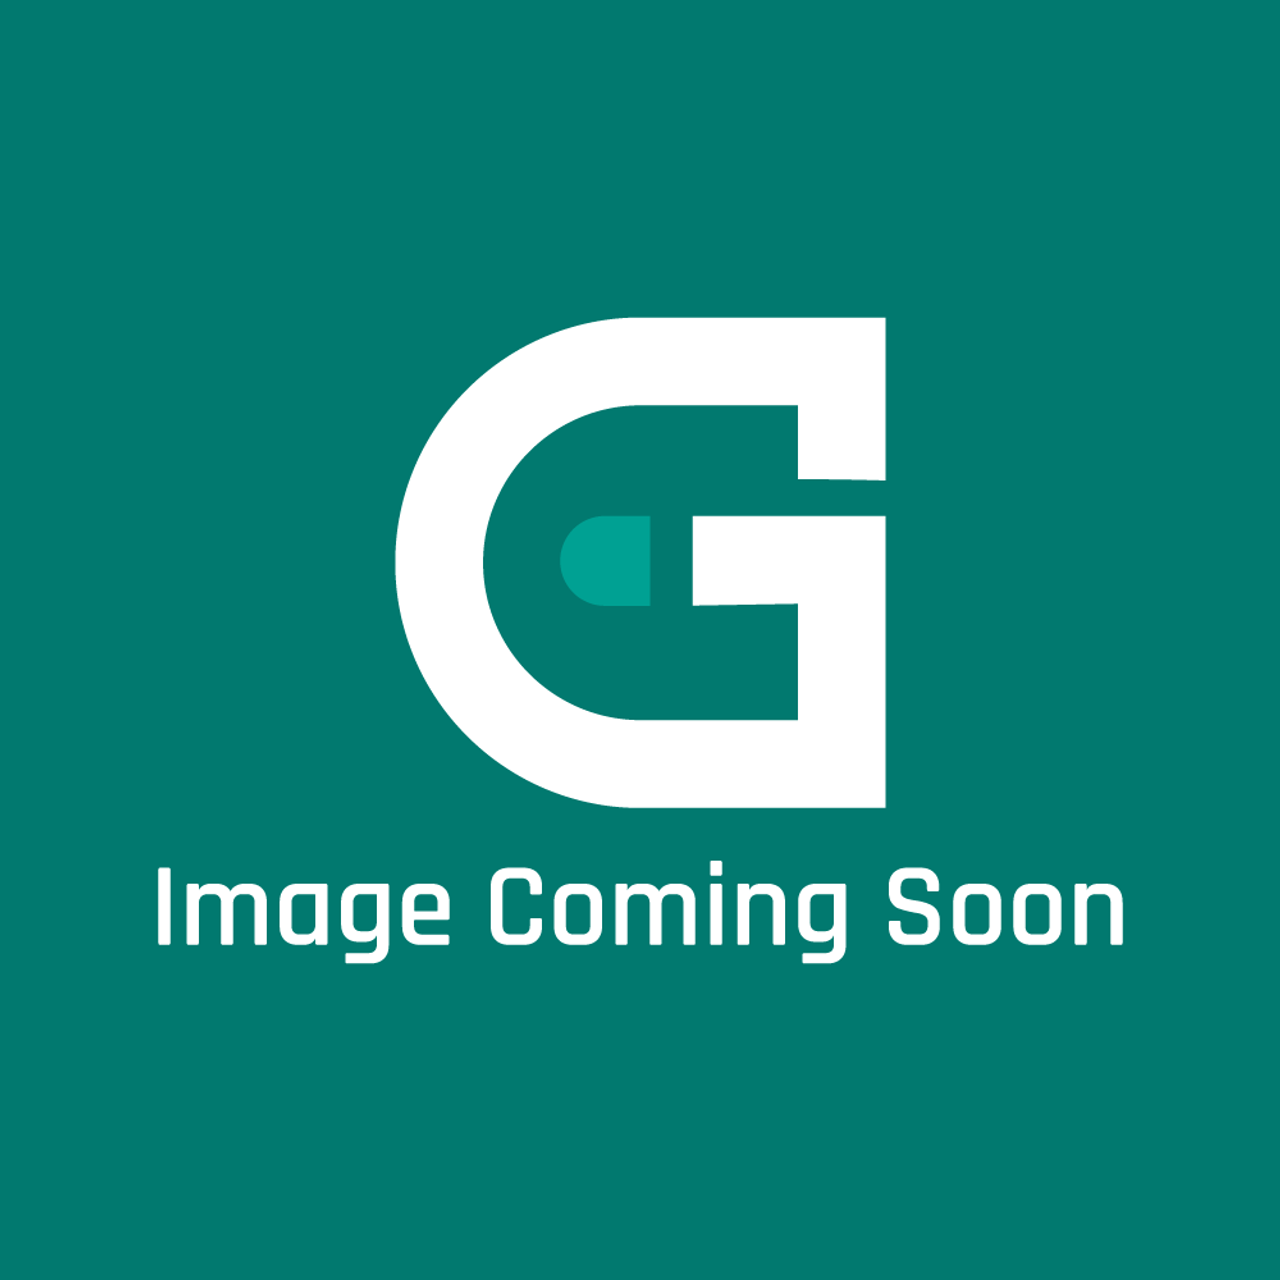 Garland 4523032 - Fire Plate Sunfire 26W S Td Ove - Image Coming Soon!